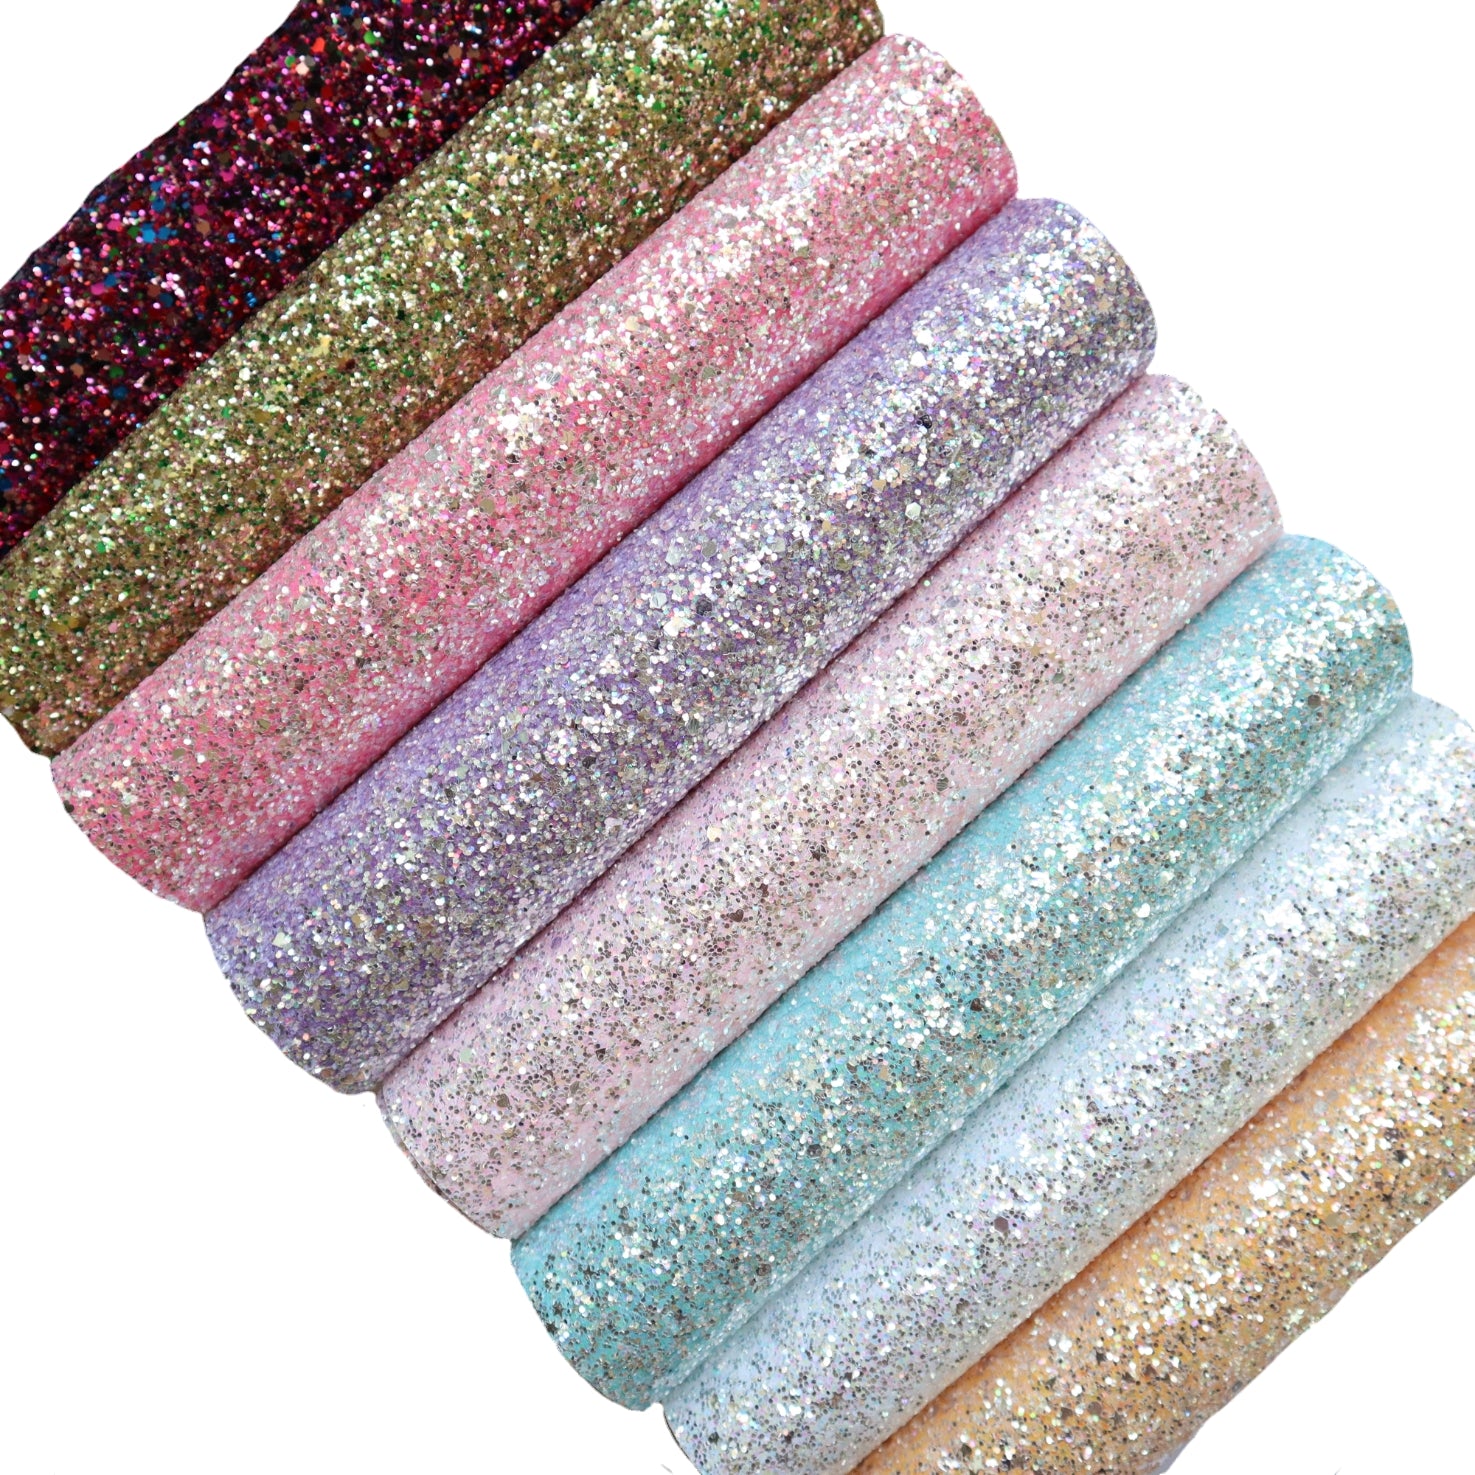 Chunky Glitter 8x10 GOLD and WHITE Metallic Glitter Fabric applied to  Leather 5.5-6oz /2.2-2.4 mm PeggySueAlso® E4355-52